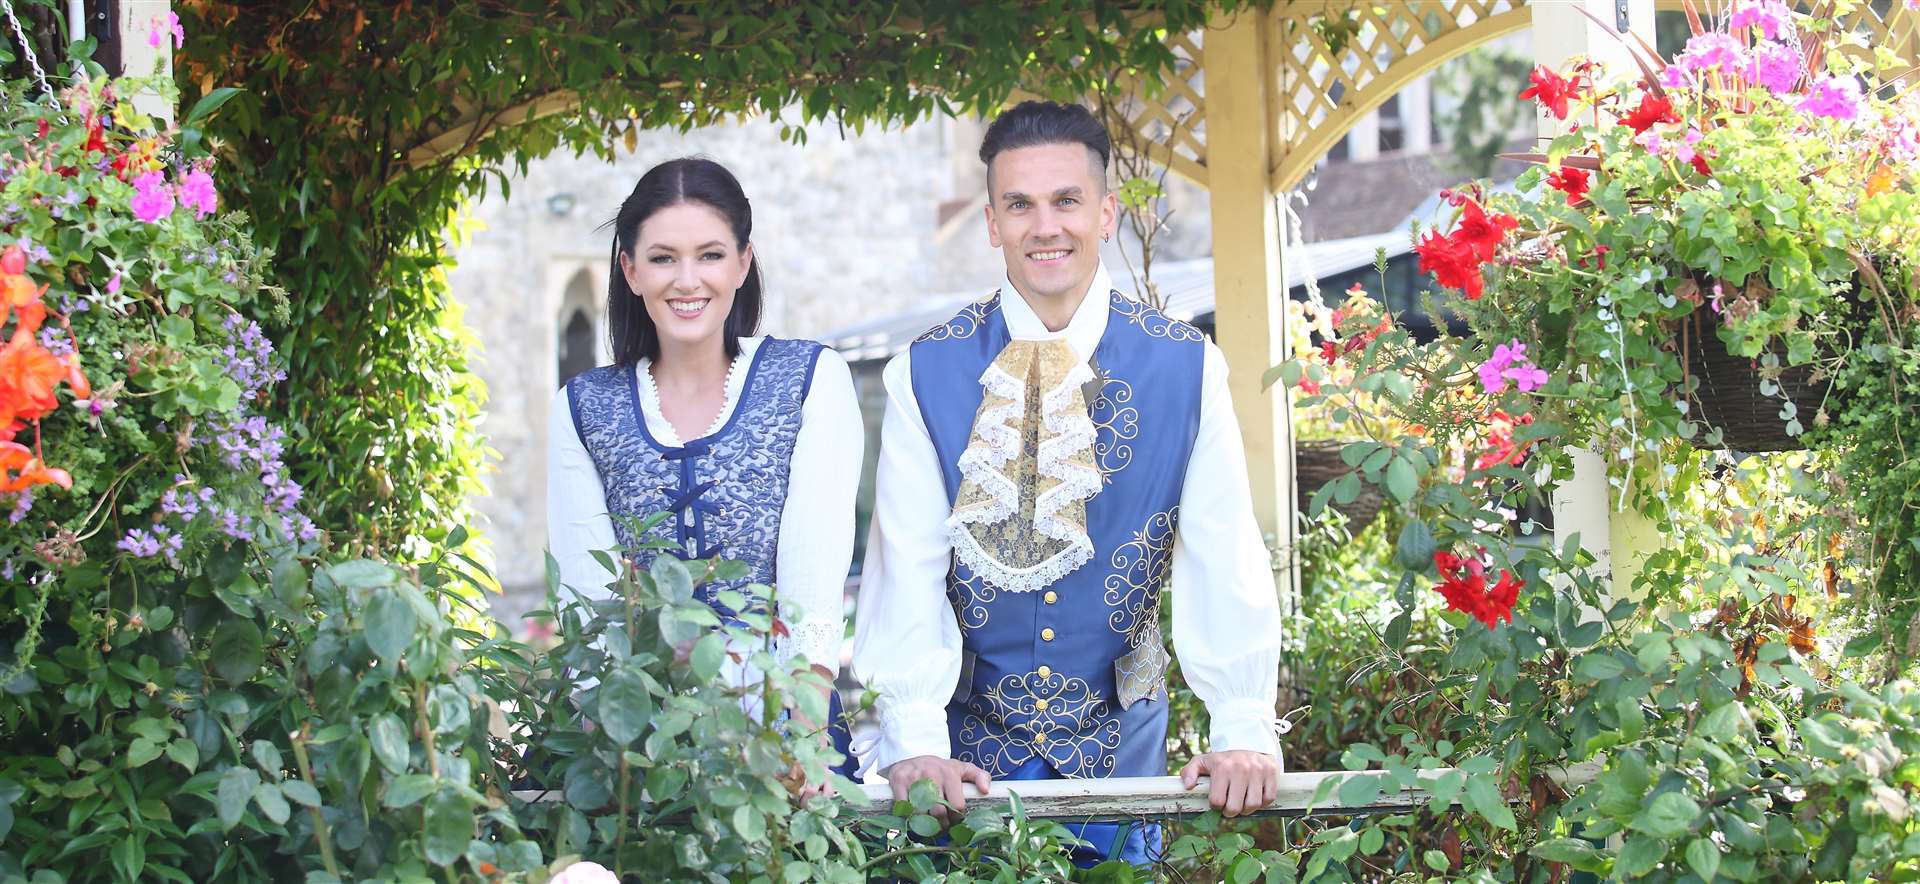 Aaron Sidwell will star in panto in Gravesend